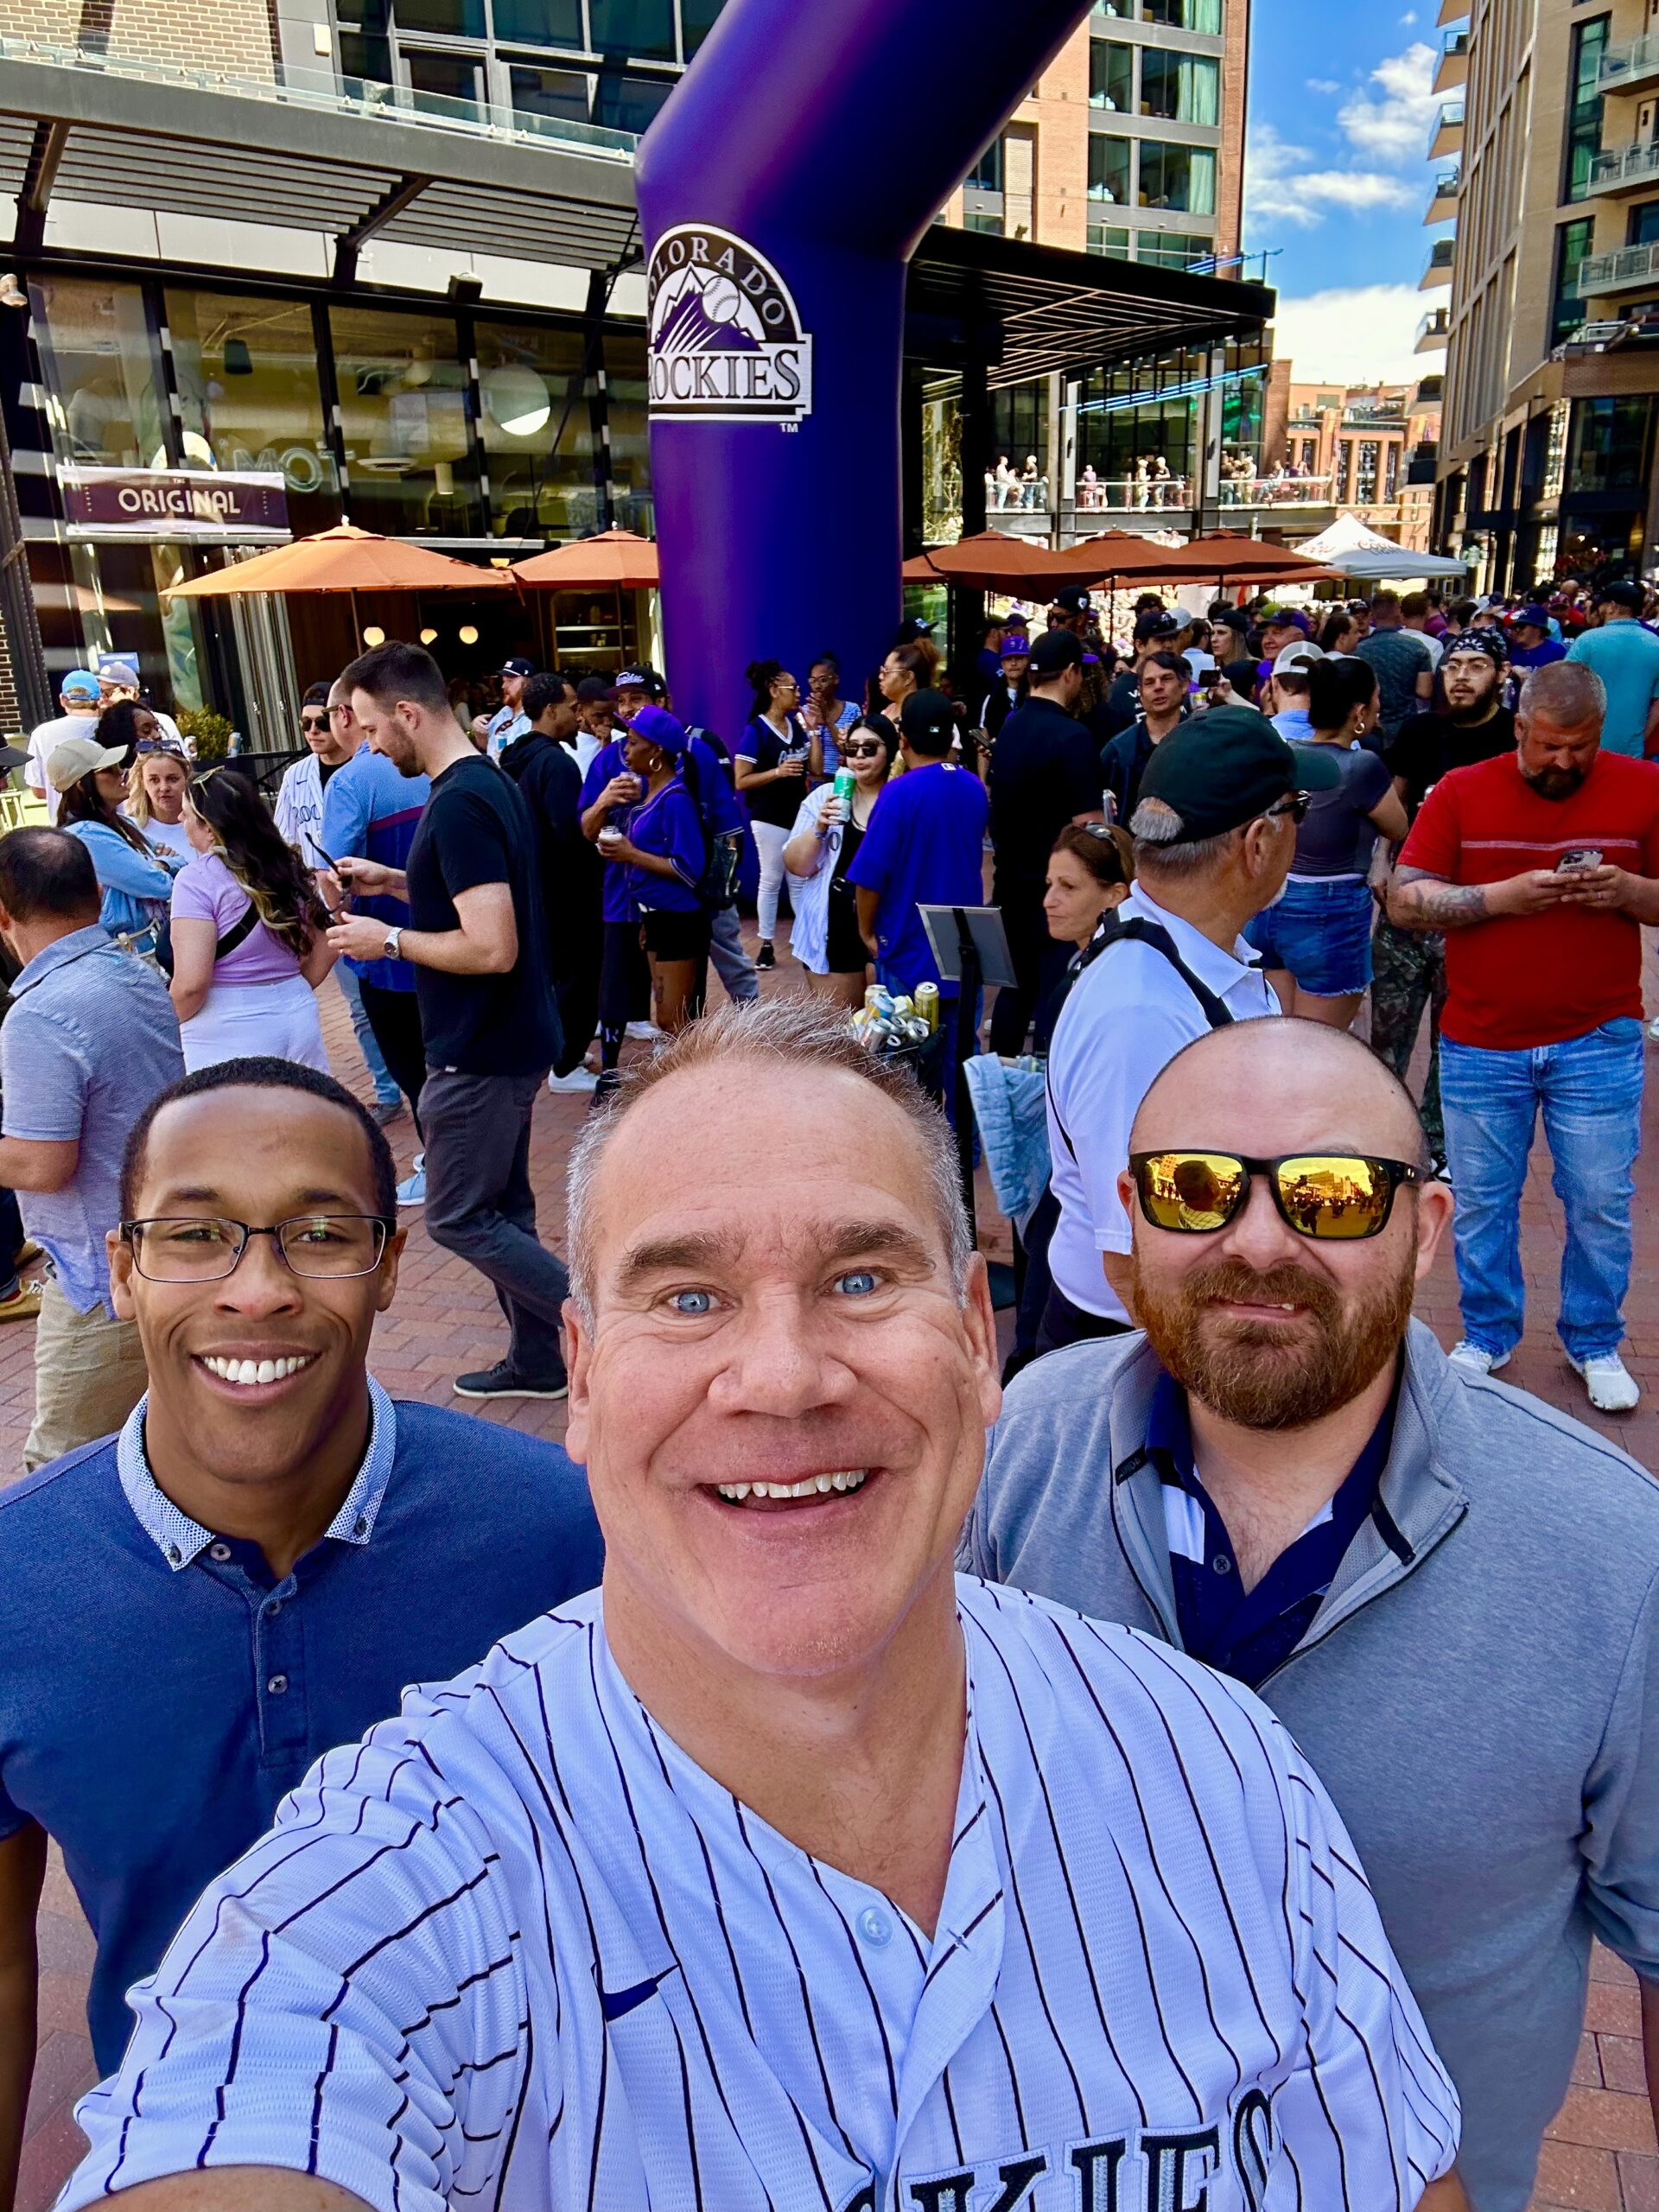 Opening day for Colorado Rockies!